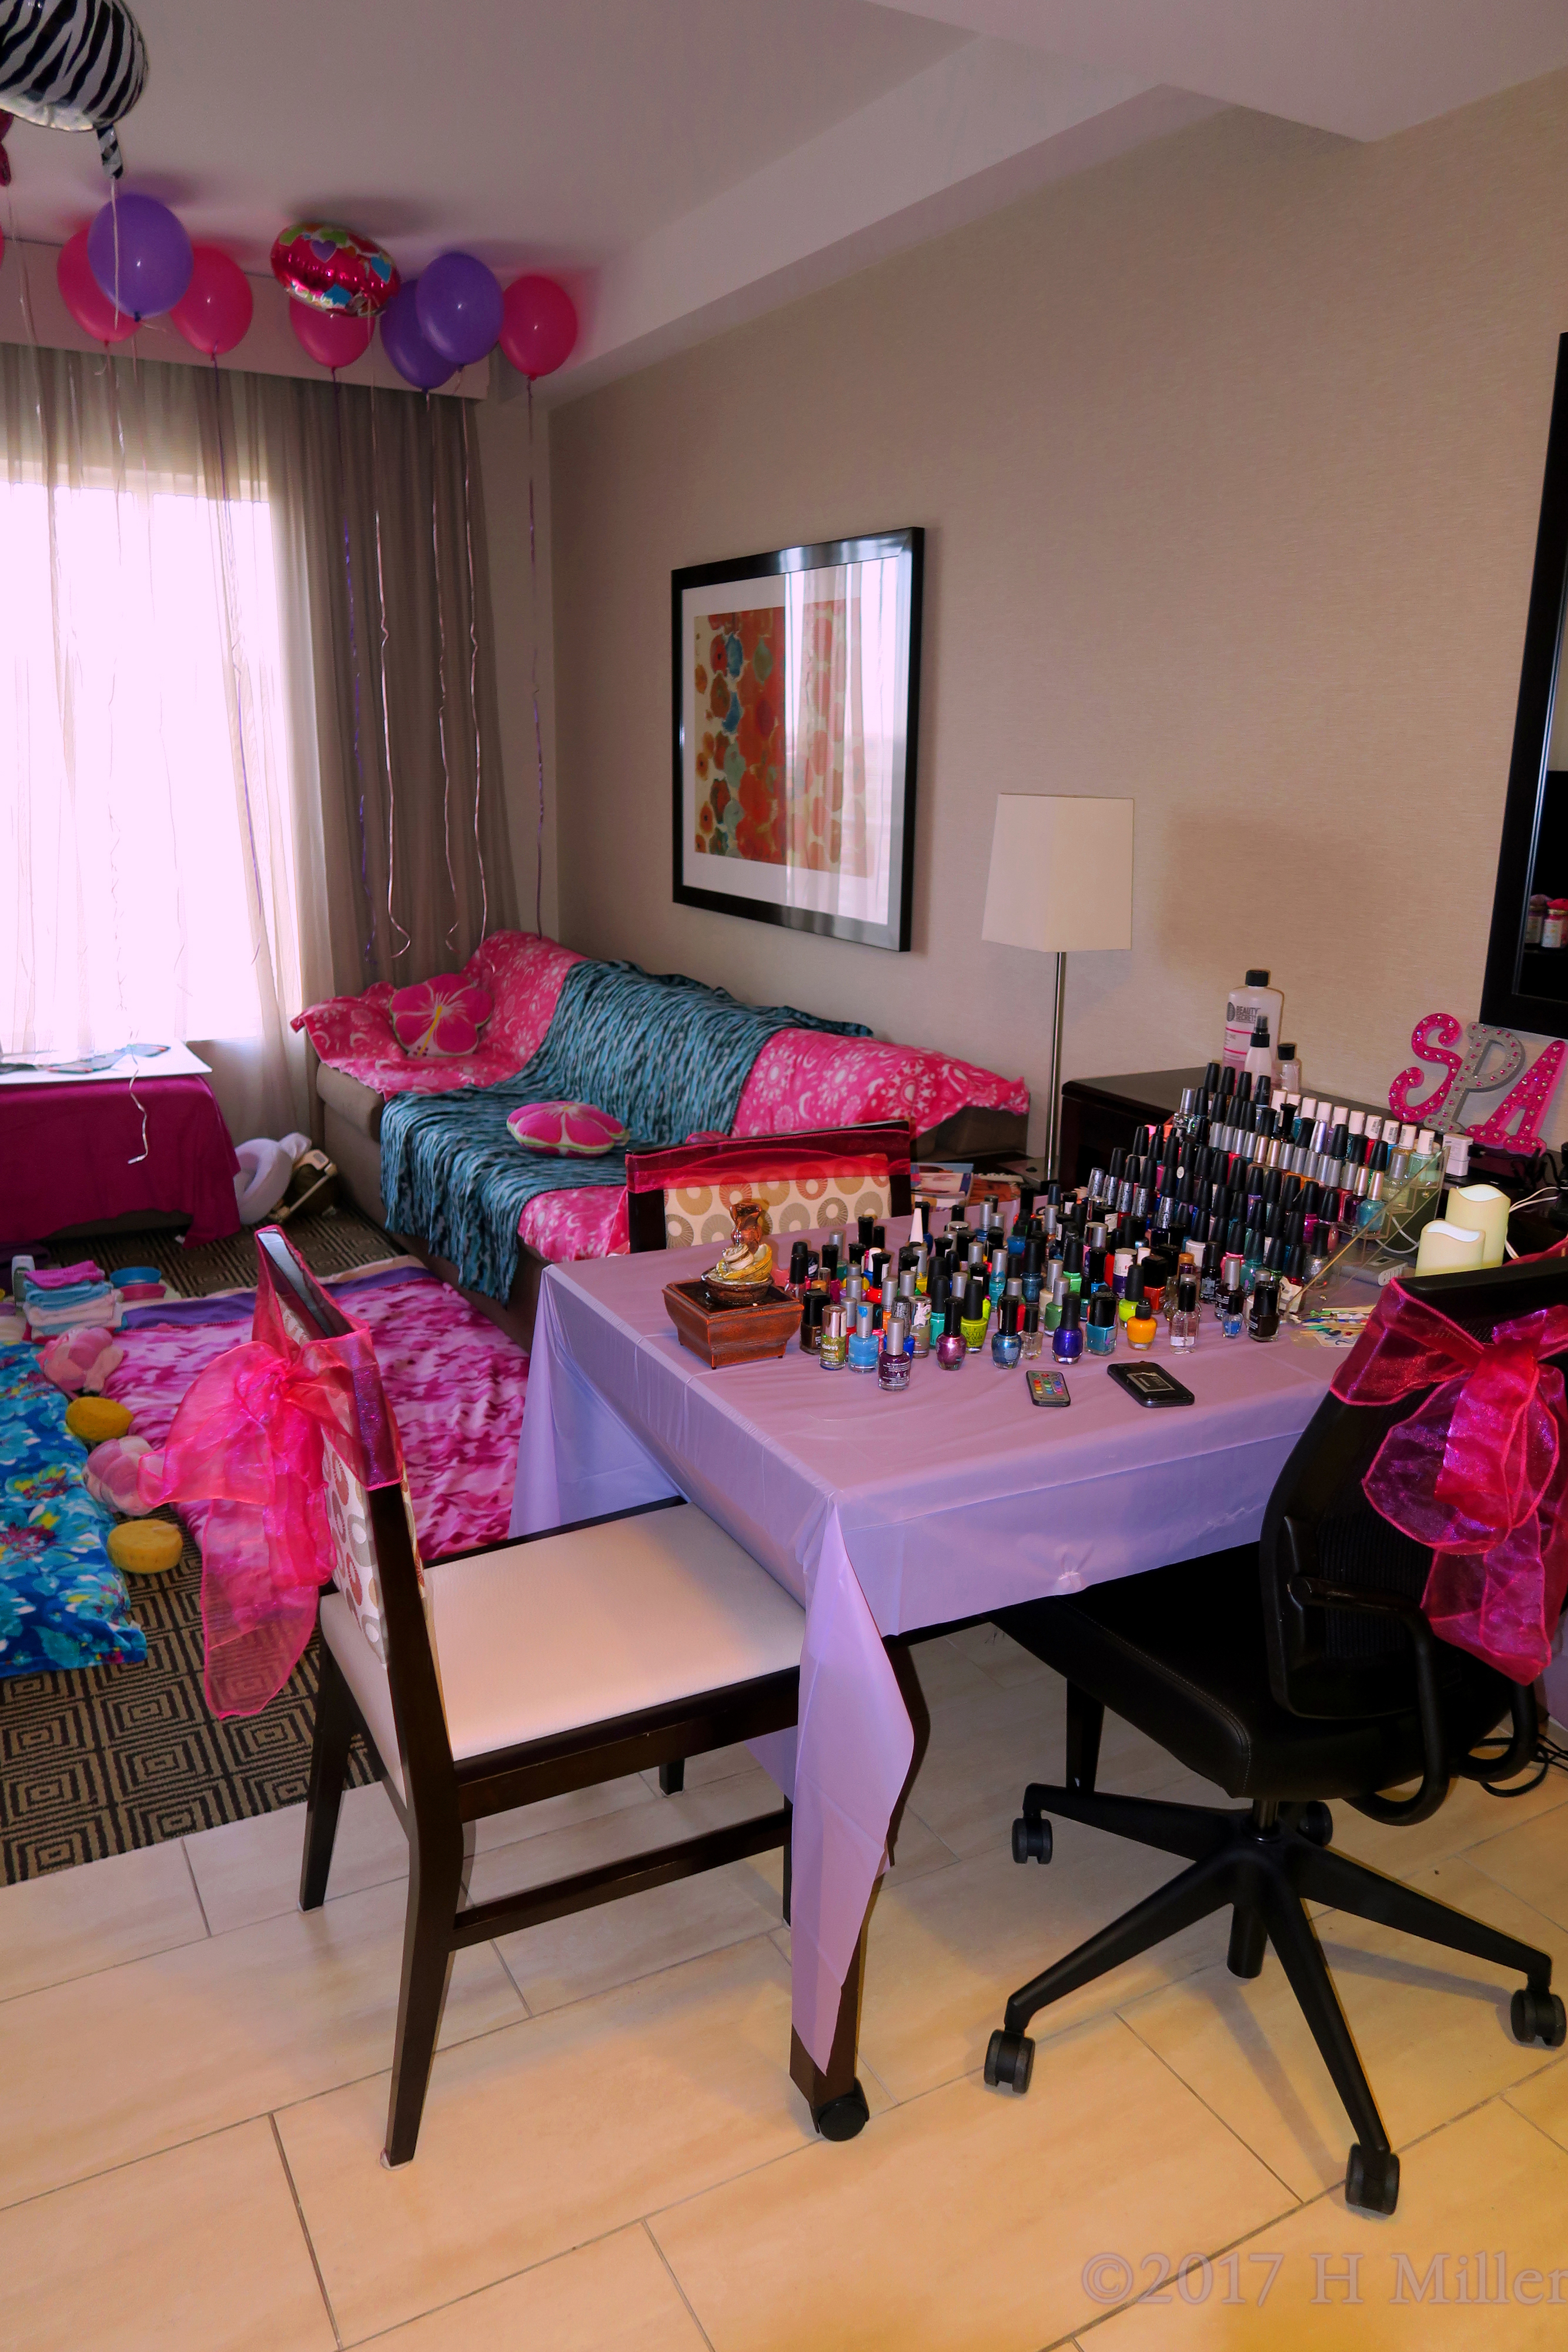 Girls Manicure And Kids Facial And Massage Area, Setup And Ready For The Girls Spa! 